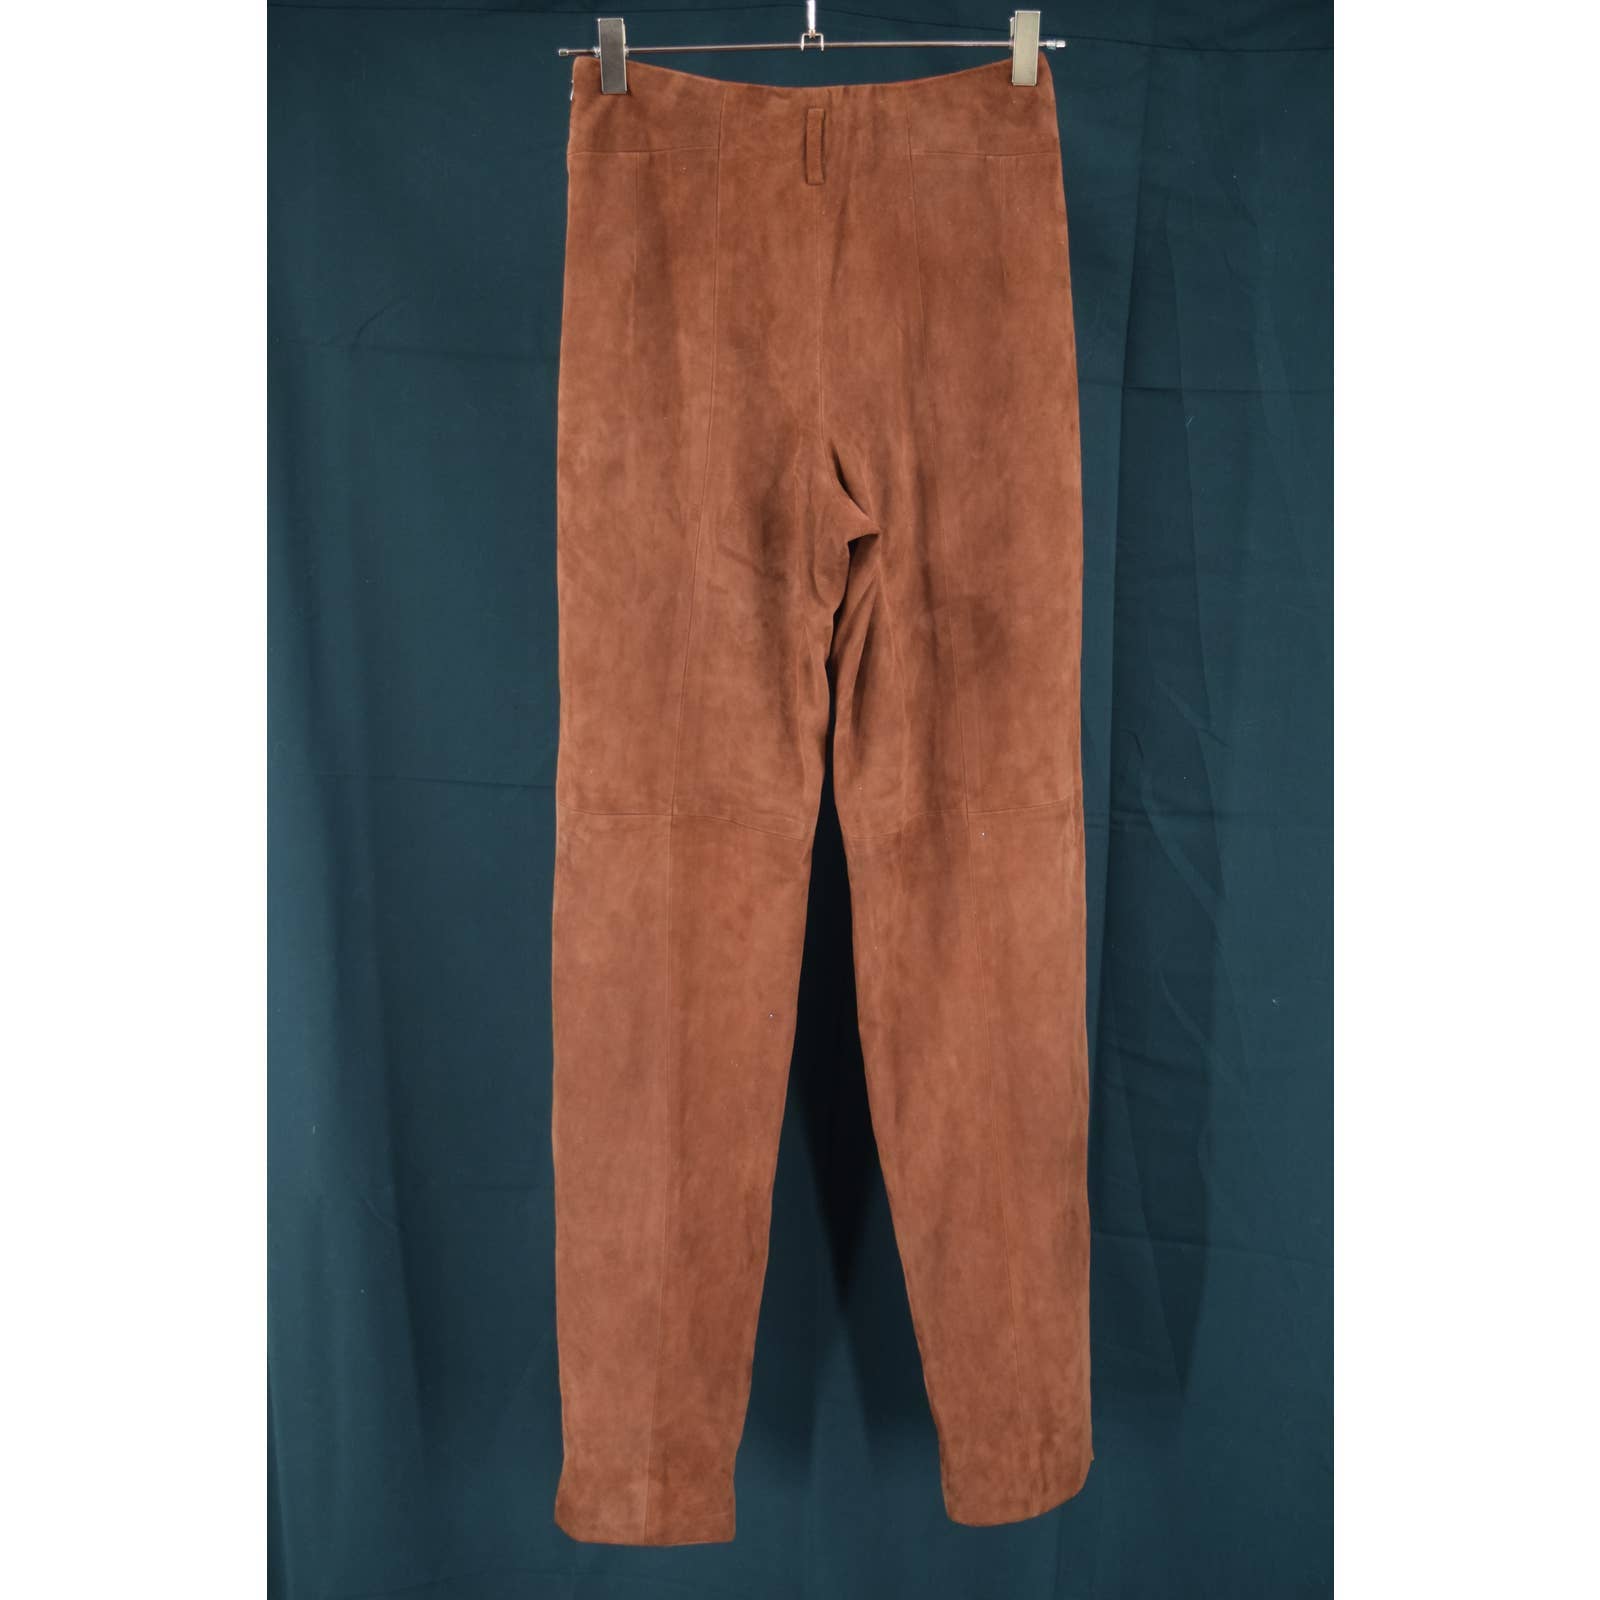 Worth Suede Leather Rust Flat Front Pants - 2